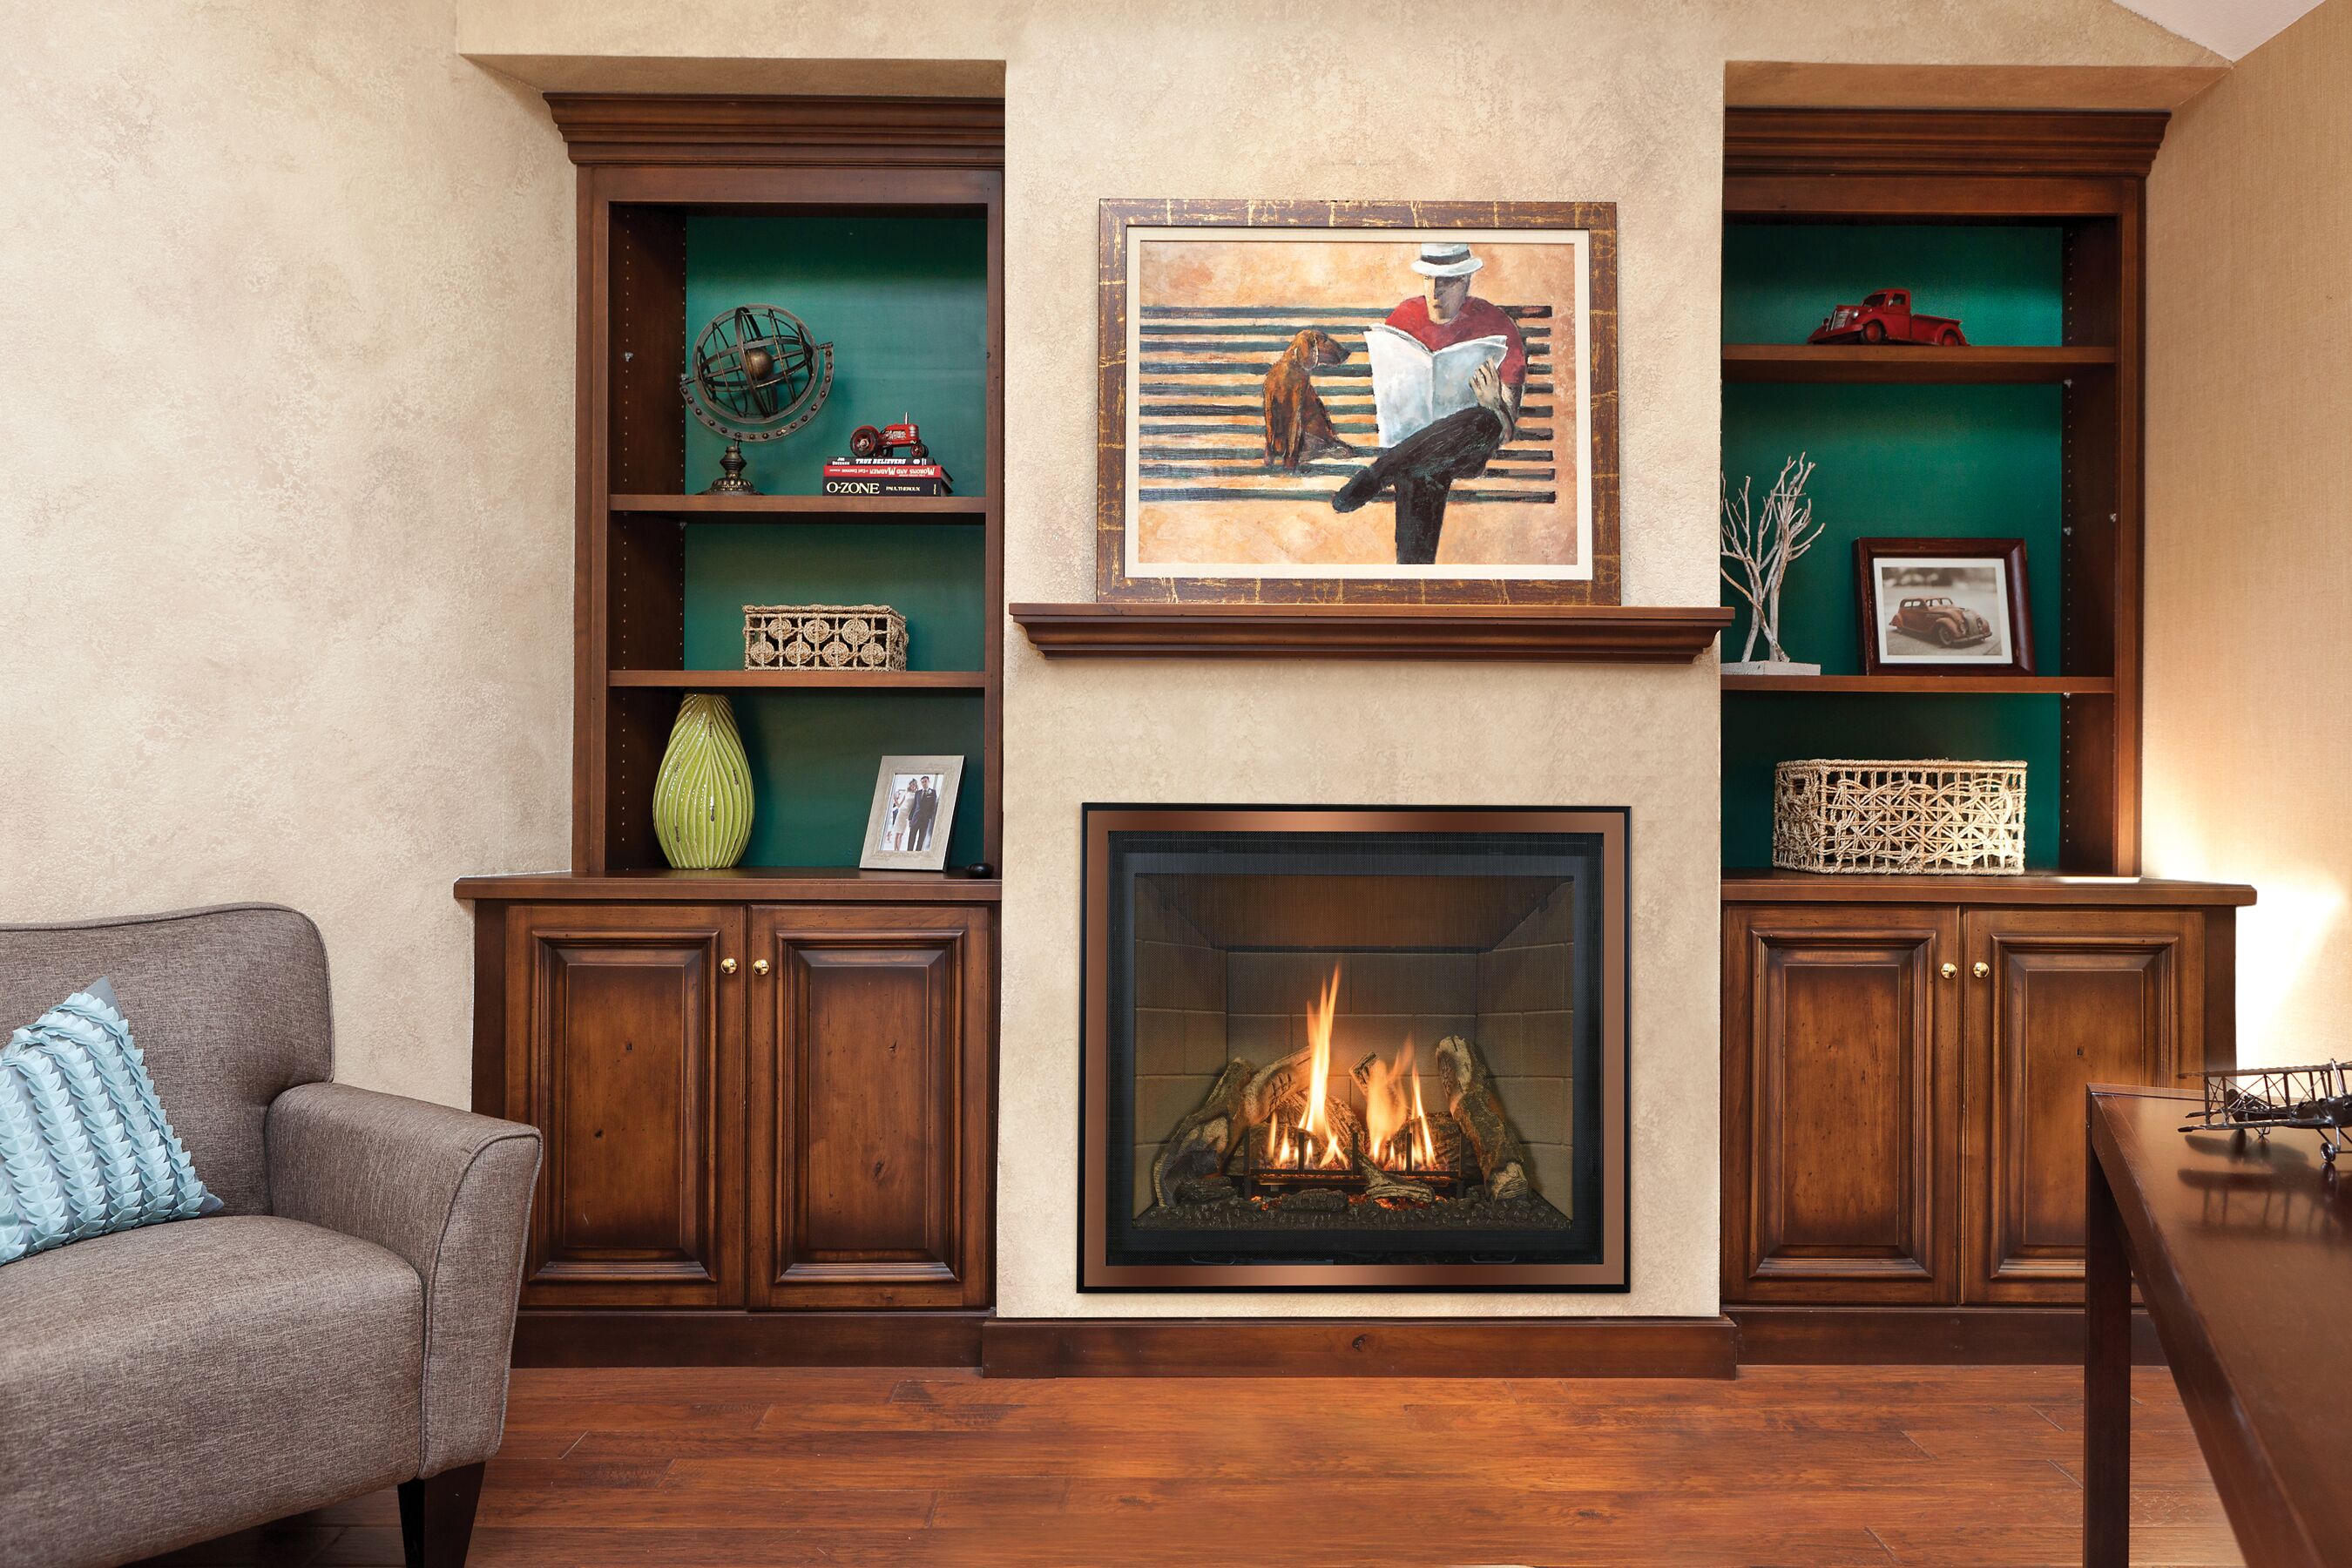 About Kozy Heat Fireplaces  B2B Fireplace Manufacturing Company